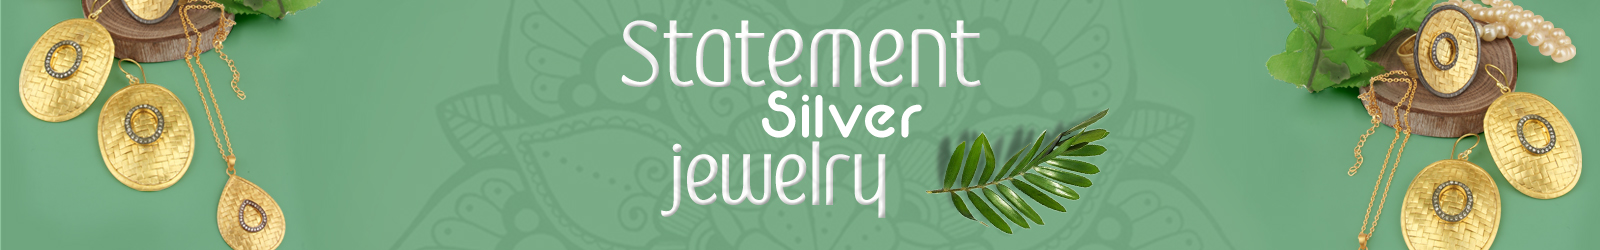 Wholesale Statement Silver Jewelry Maker In India